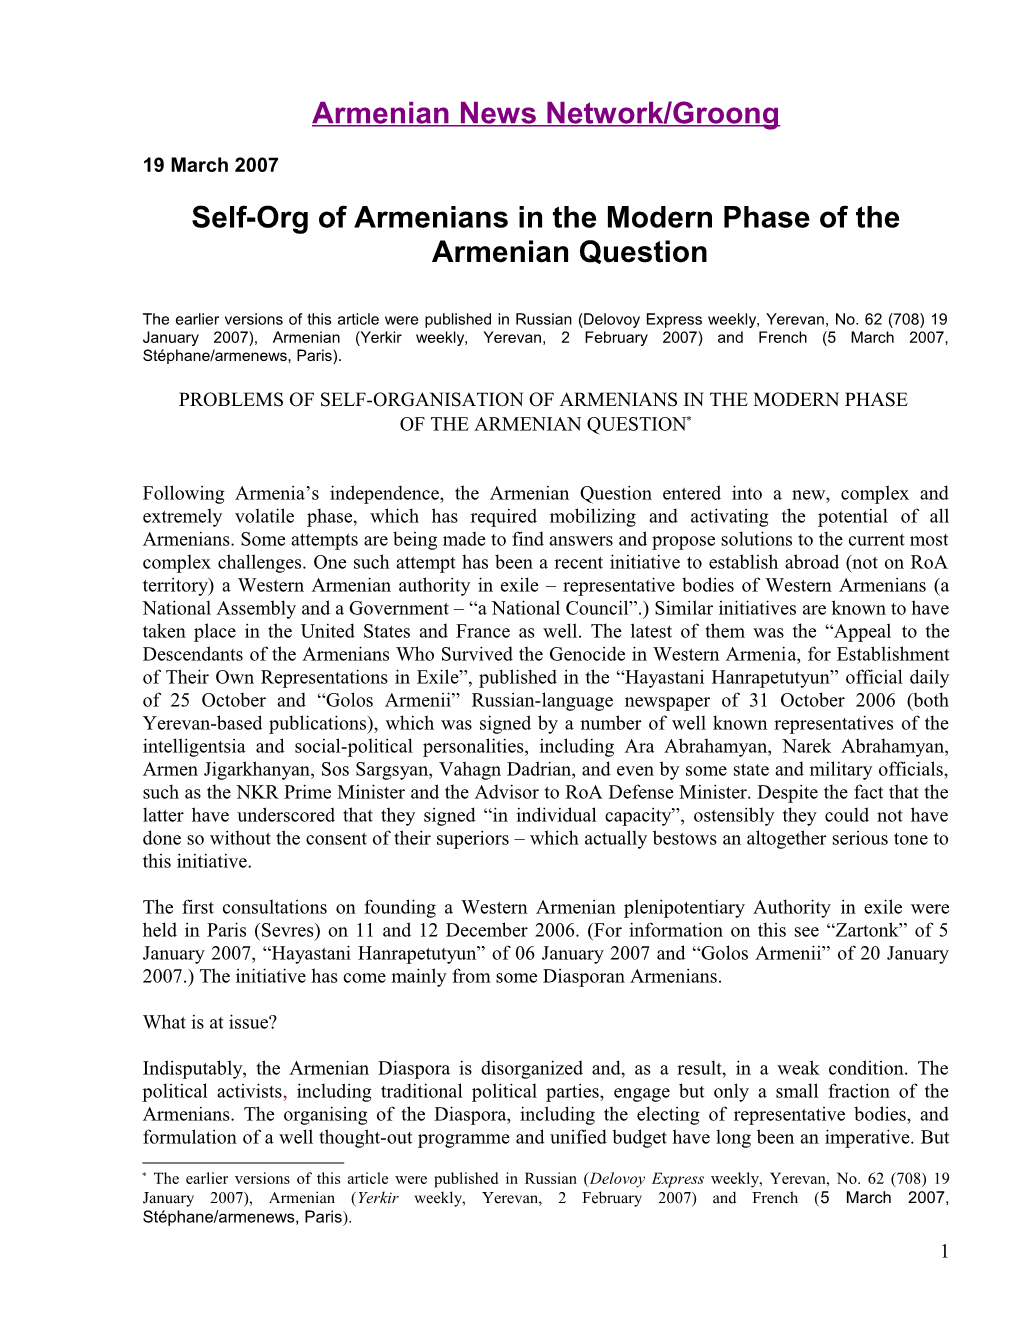 Problems of Self-Organisation of Armenians in the Modern Phase of the Armenian Question